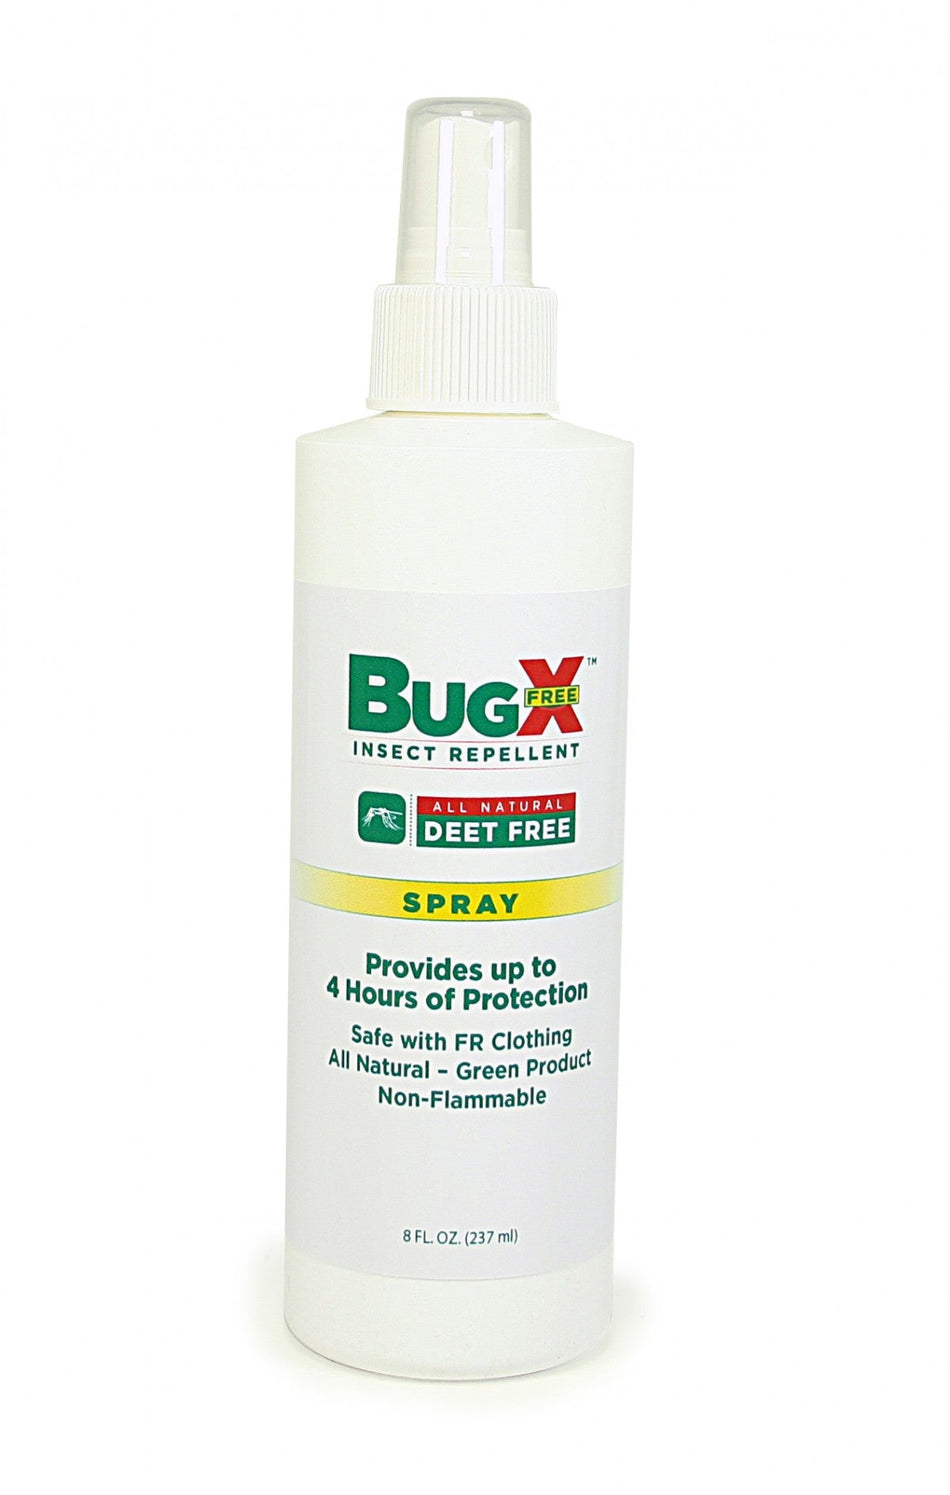 18-808 First Aid Only BugX DEET FREE Insect Repellent Spray, 8 oz. Bottle - Sold per Each